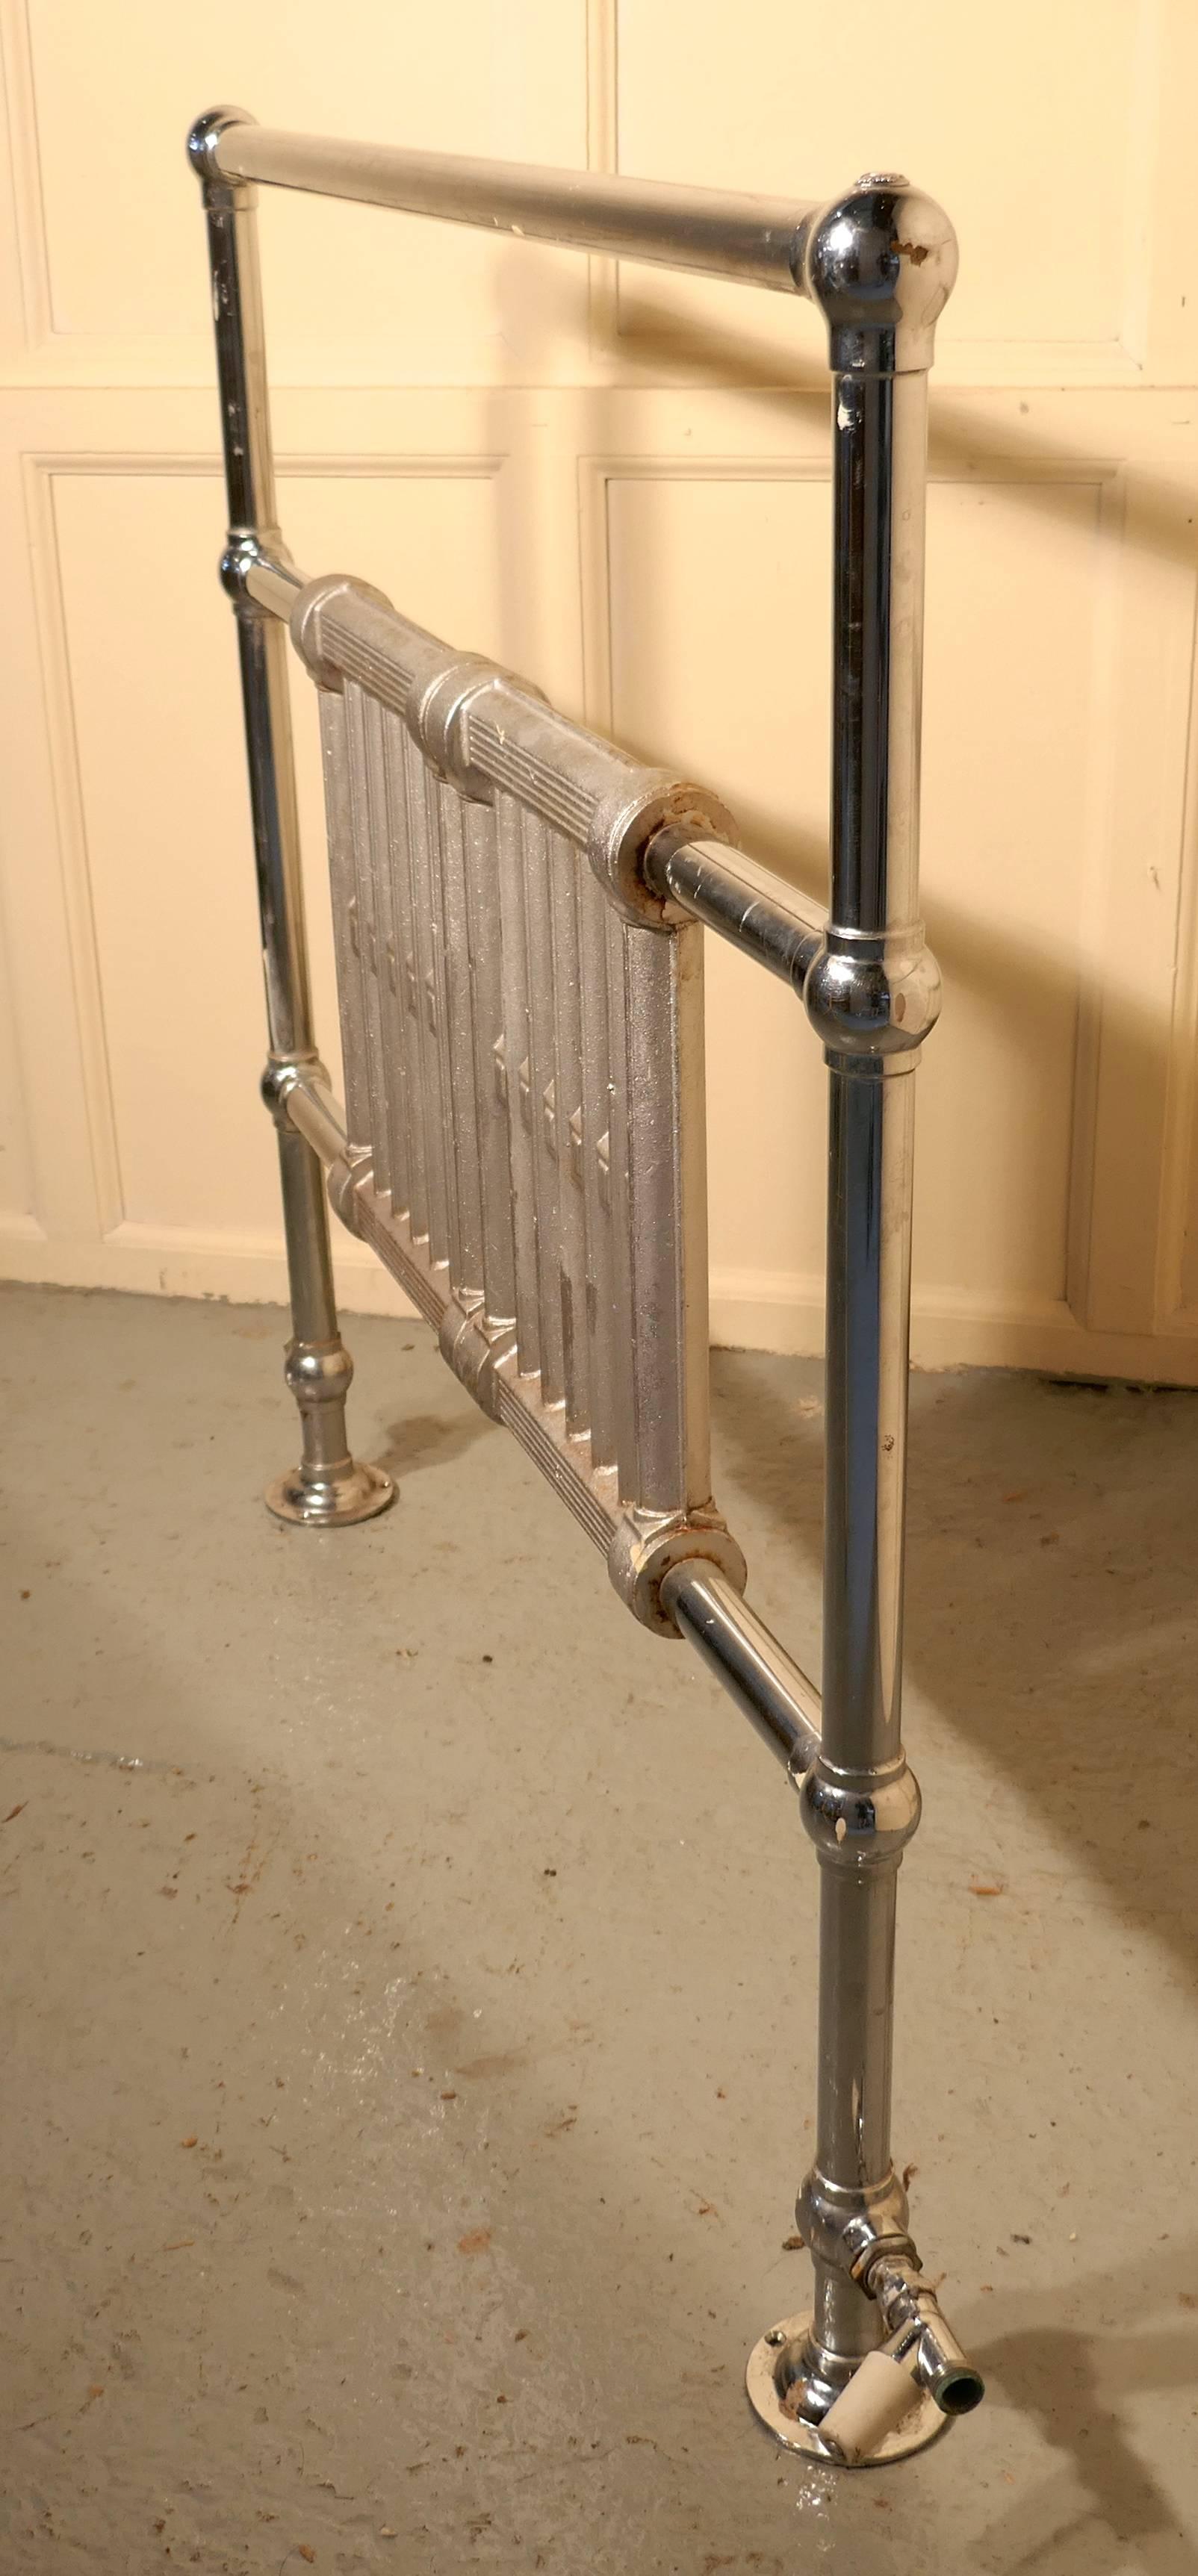 Art Deco solid chrome on brass towel rail radiator

A handsome piece is in very good condition, it is made from 2” chrome on brass tube and has a substantial cast iron radiator in the centre. The towel rail will Stand on its own so it could be